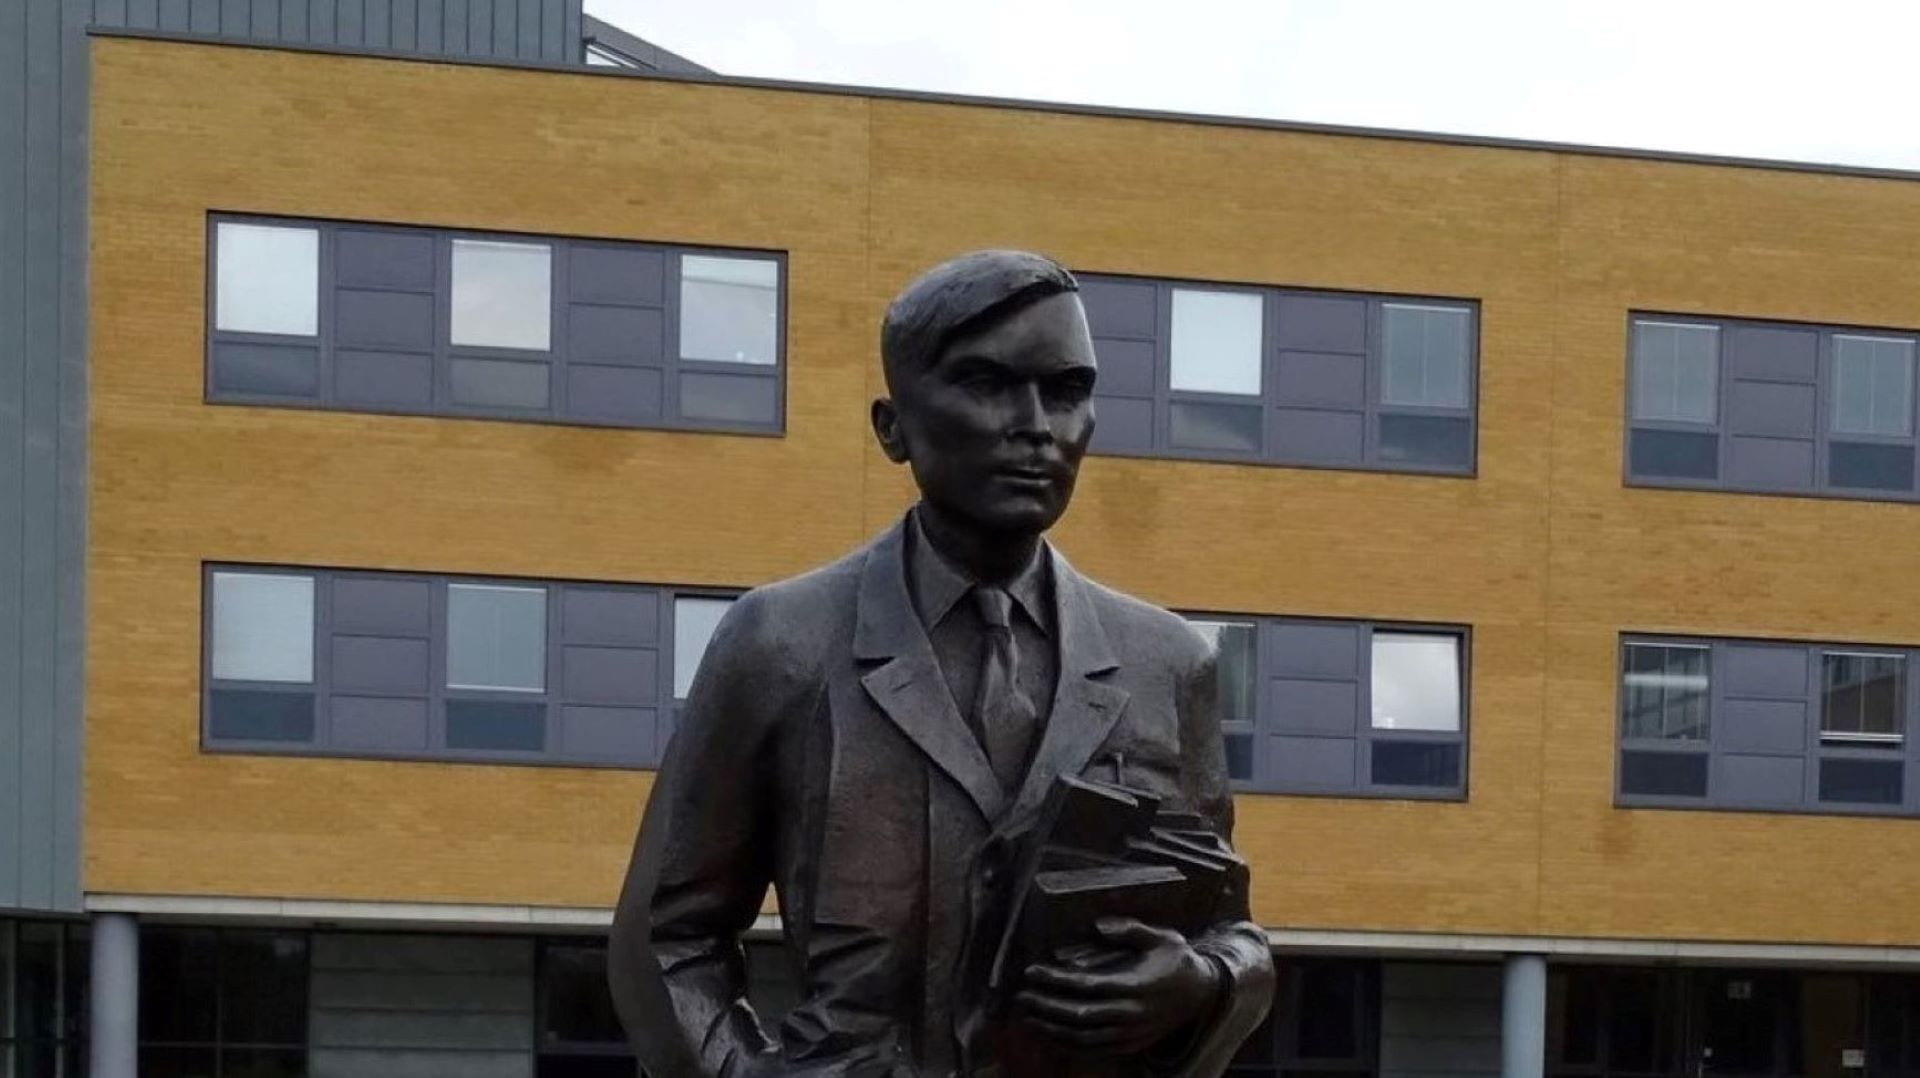 While Alan Turing’s remarkable legacy is now celebrated, it is important to remember the persecution he faced on account of his sexual orientation.